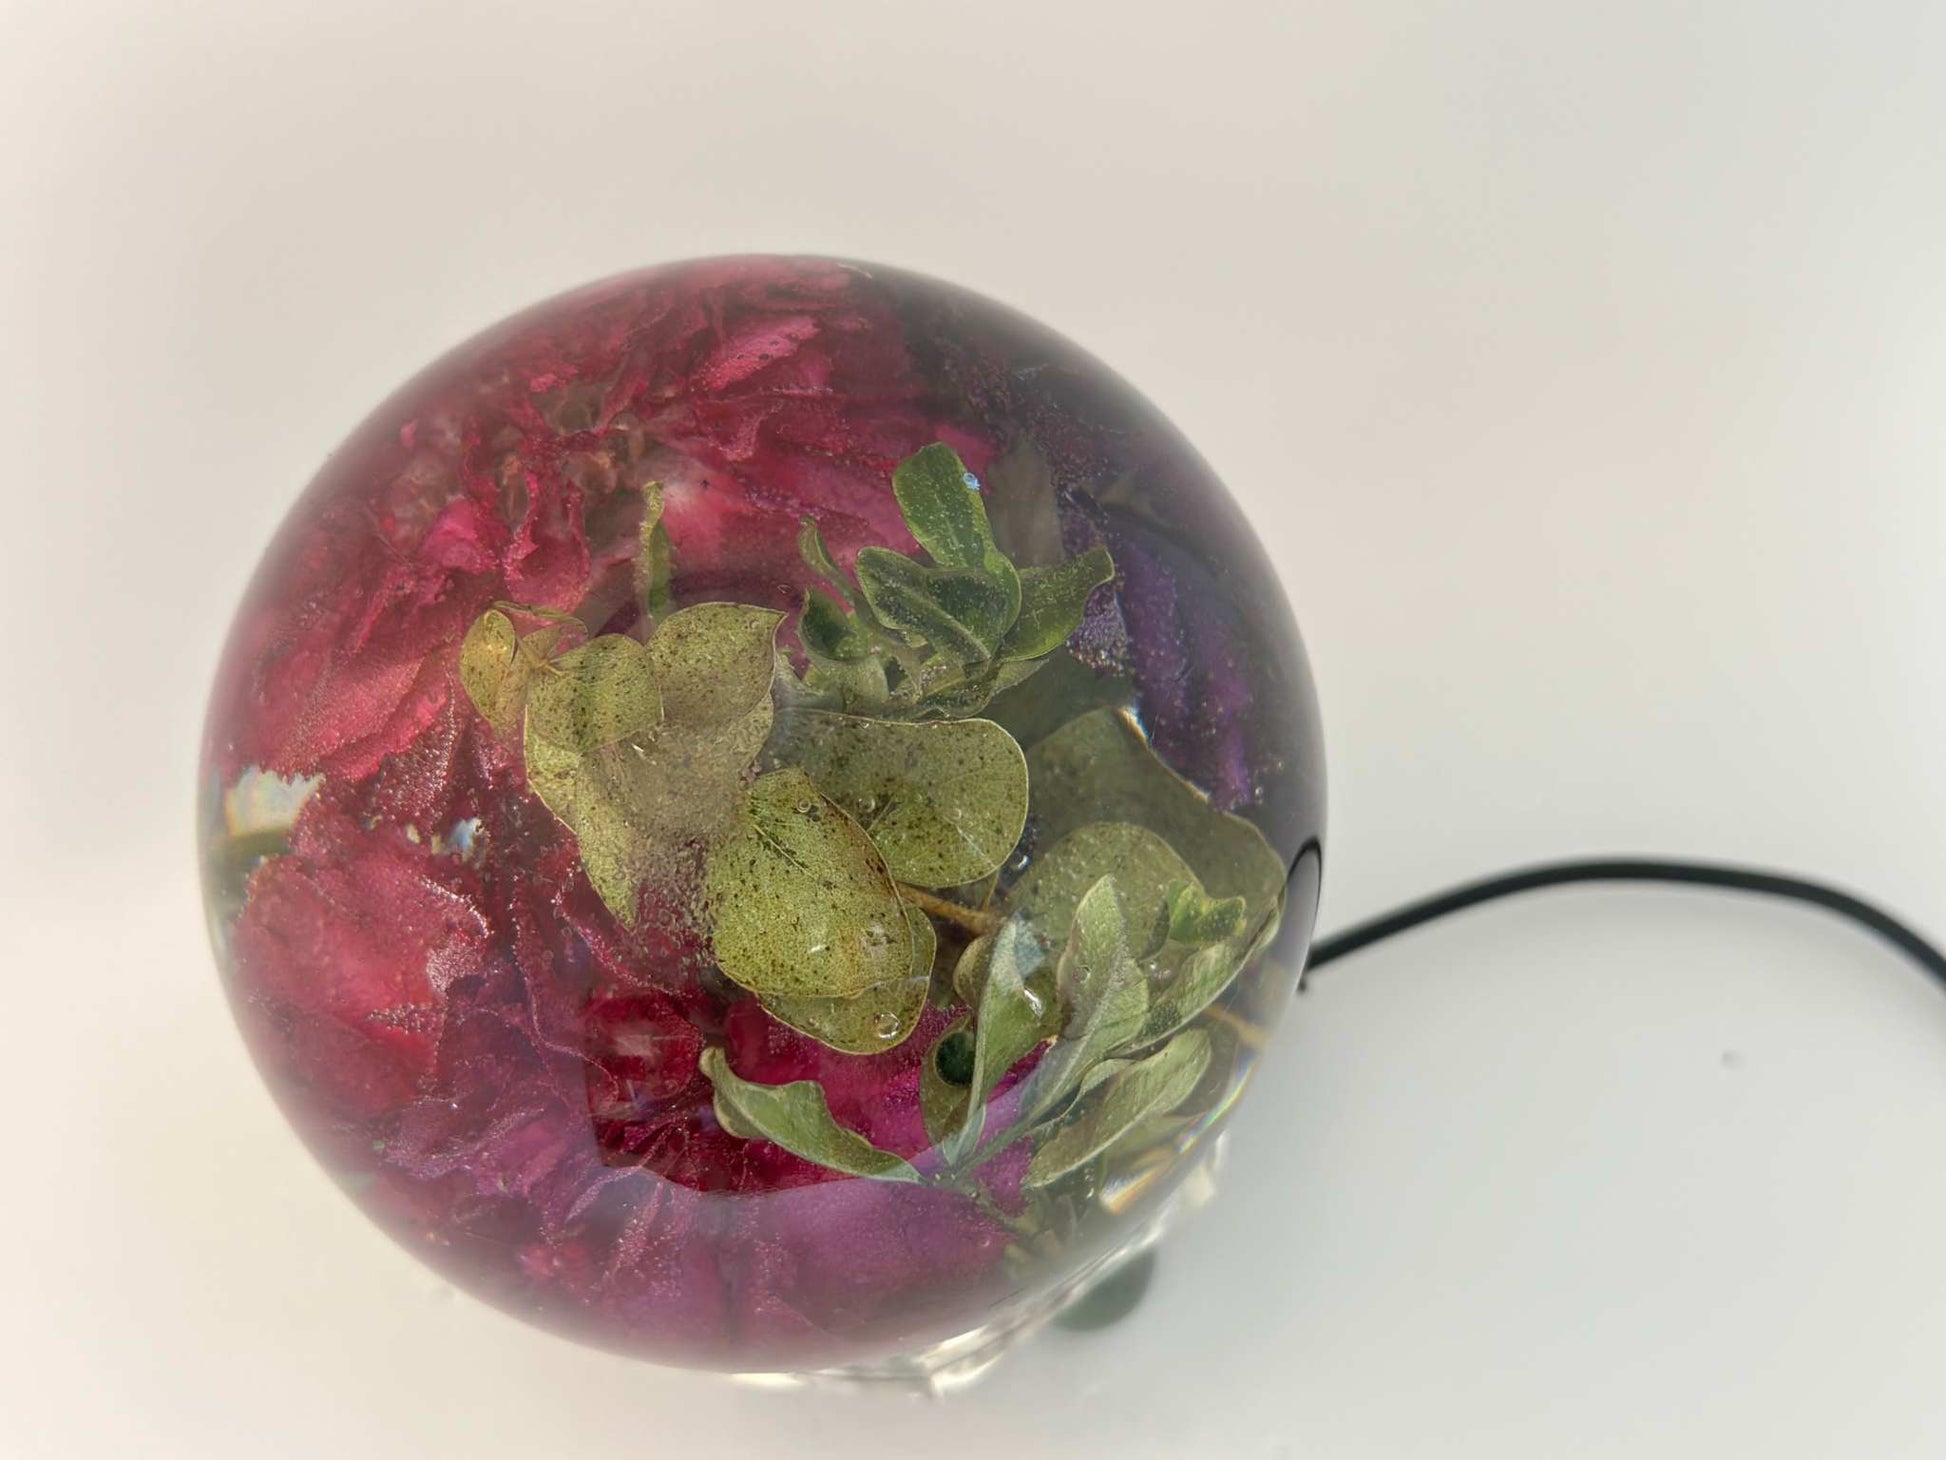 Carnation Resin Sphere - Pink Beauty - Home Decor Lighted Sculpture